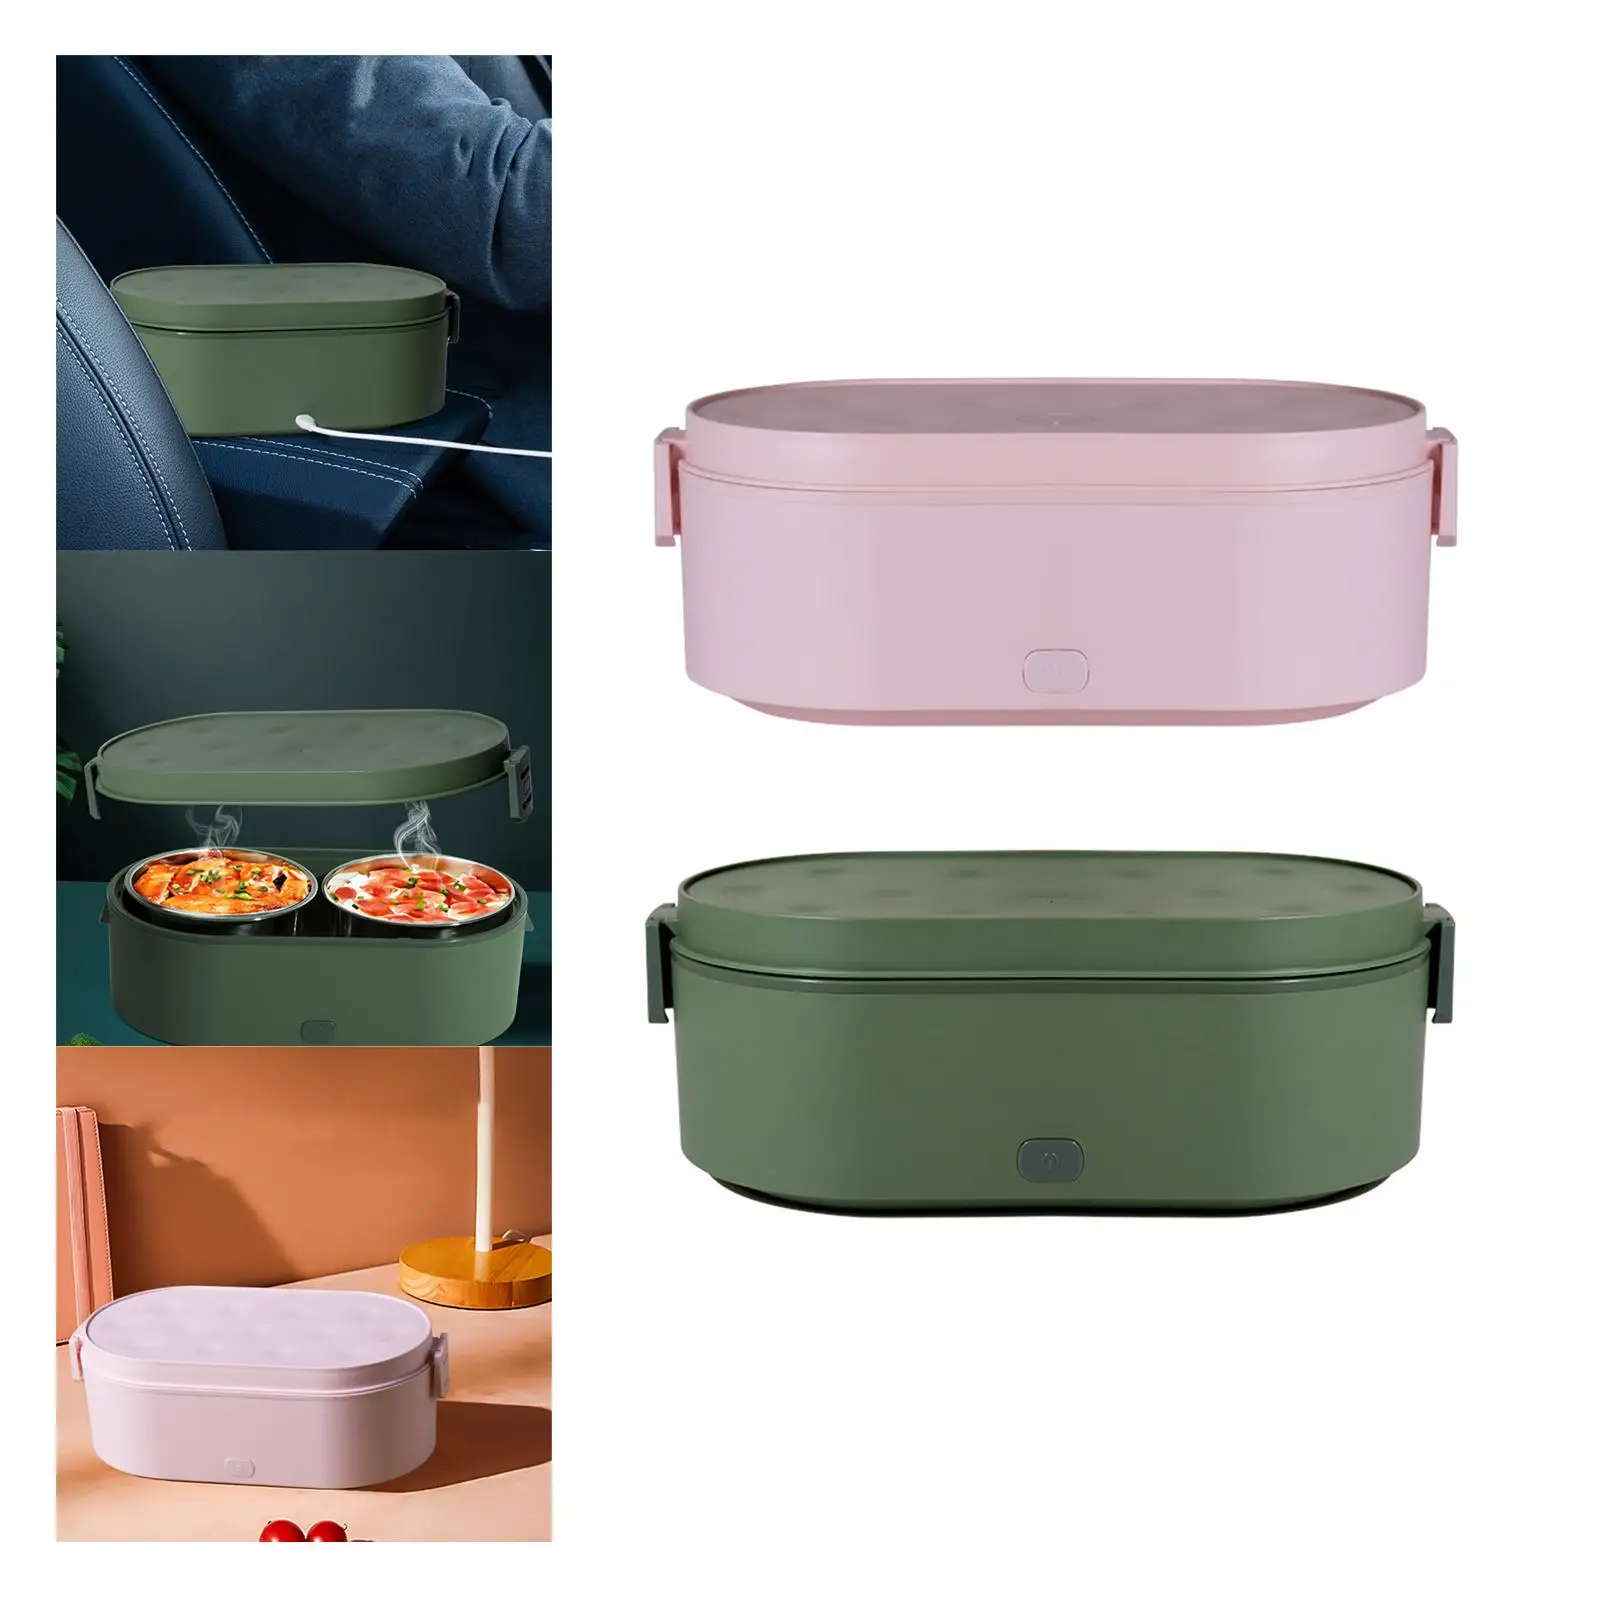 Lunch Box Multifunction Electric Heated Lunch Boxes Warmer for Office